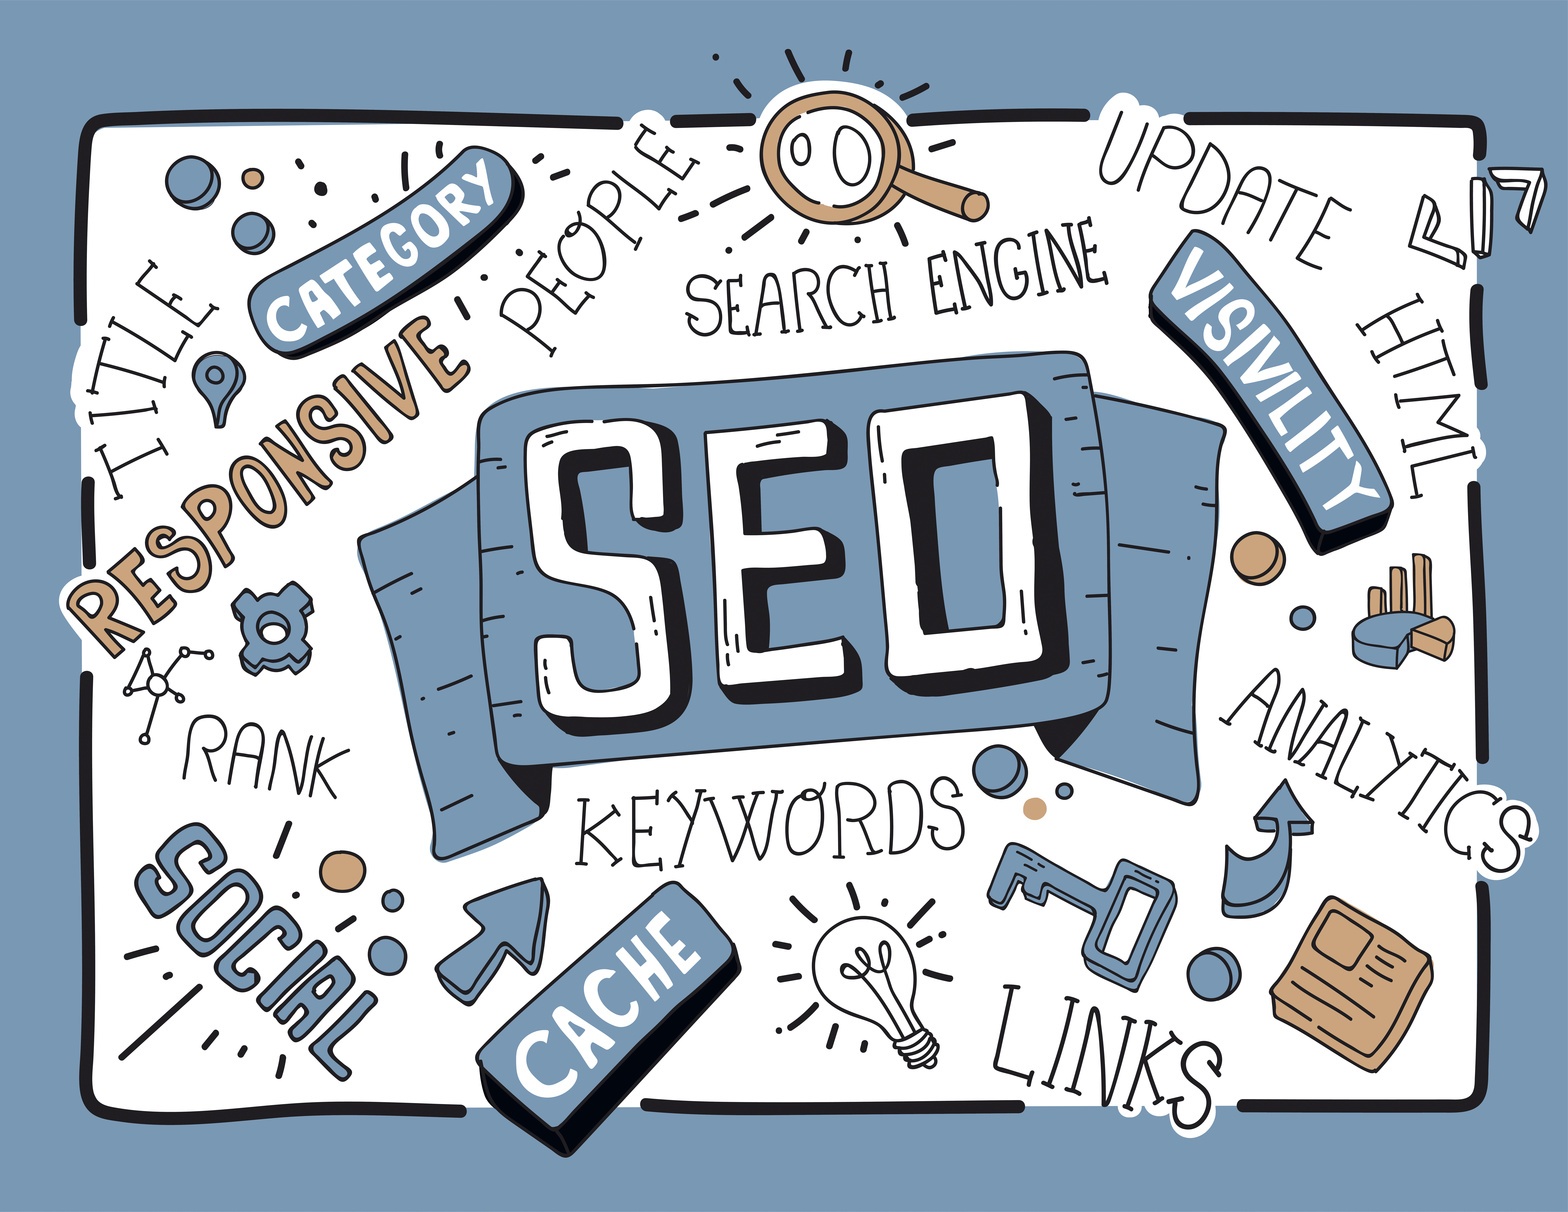 75 Steps to SEO Success (infographic)